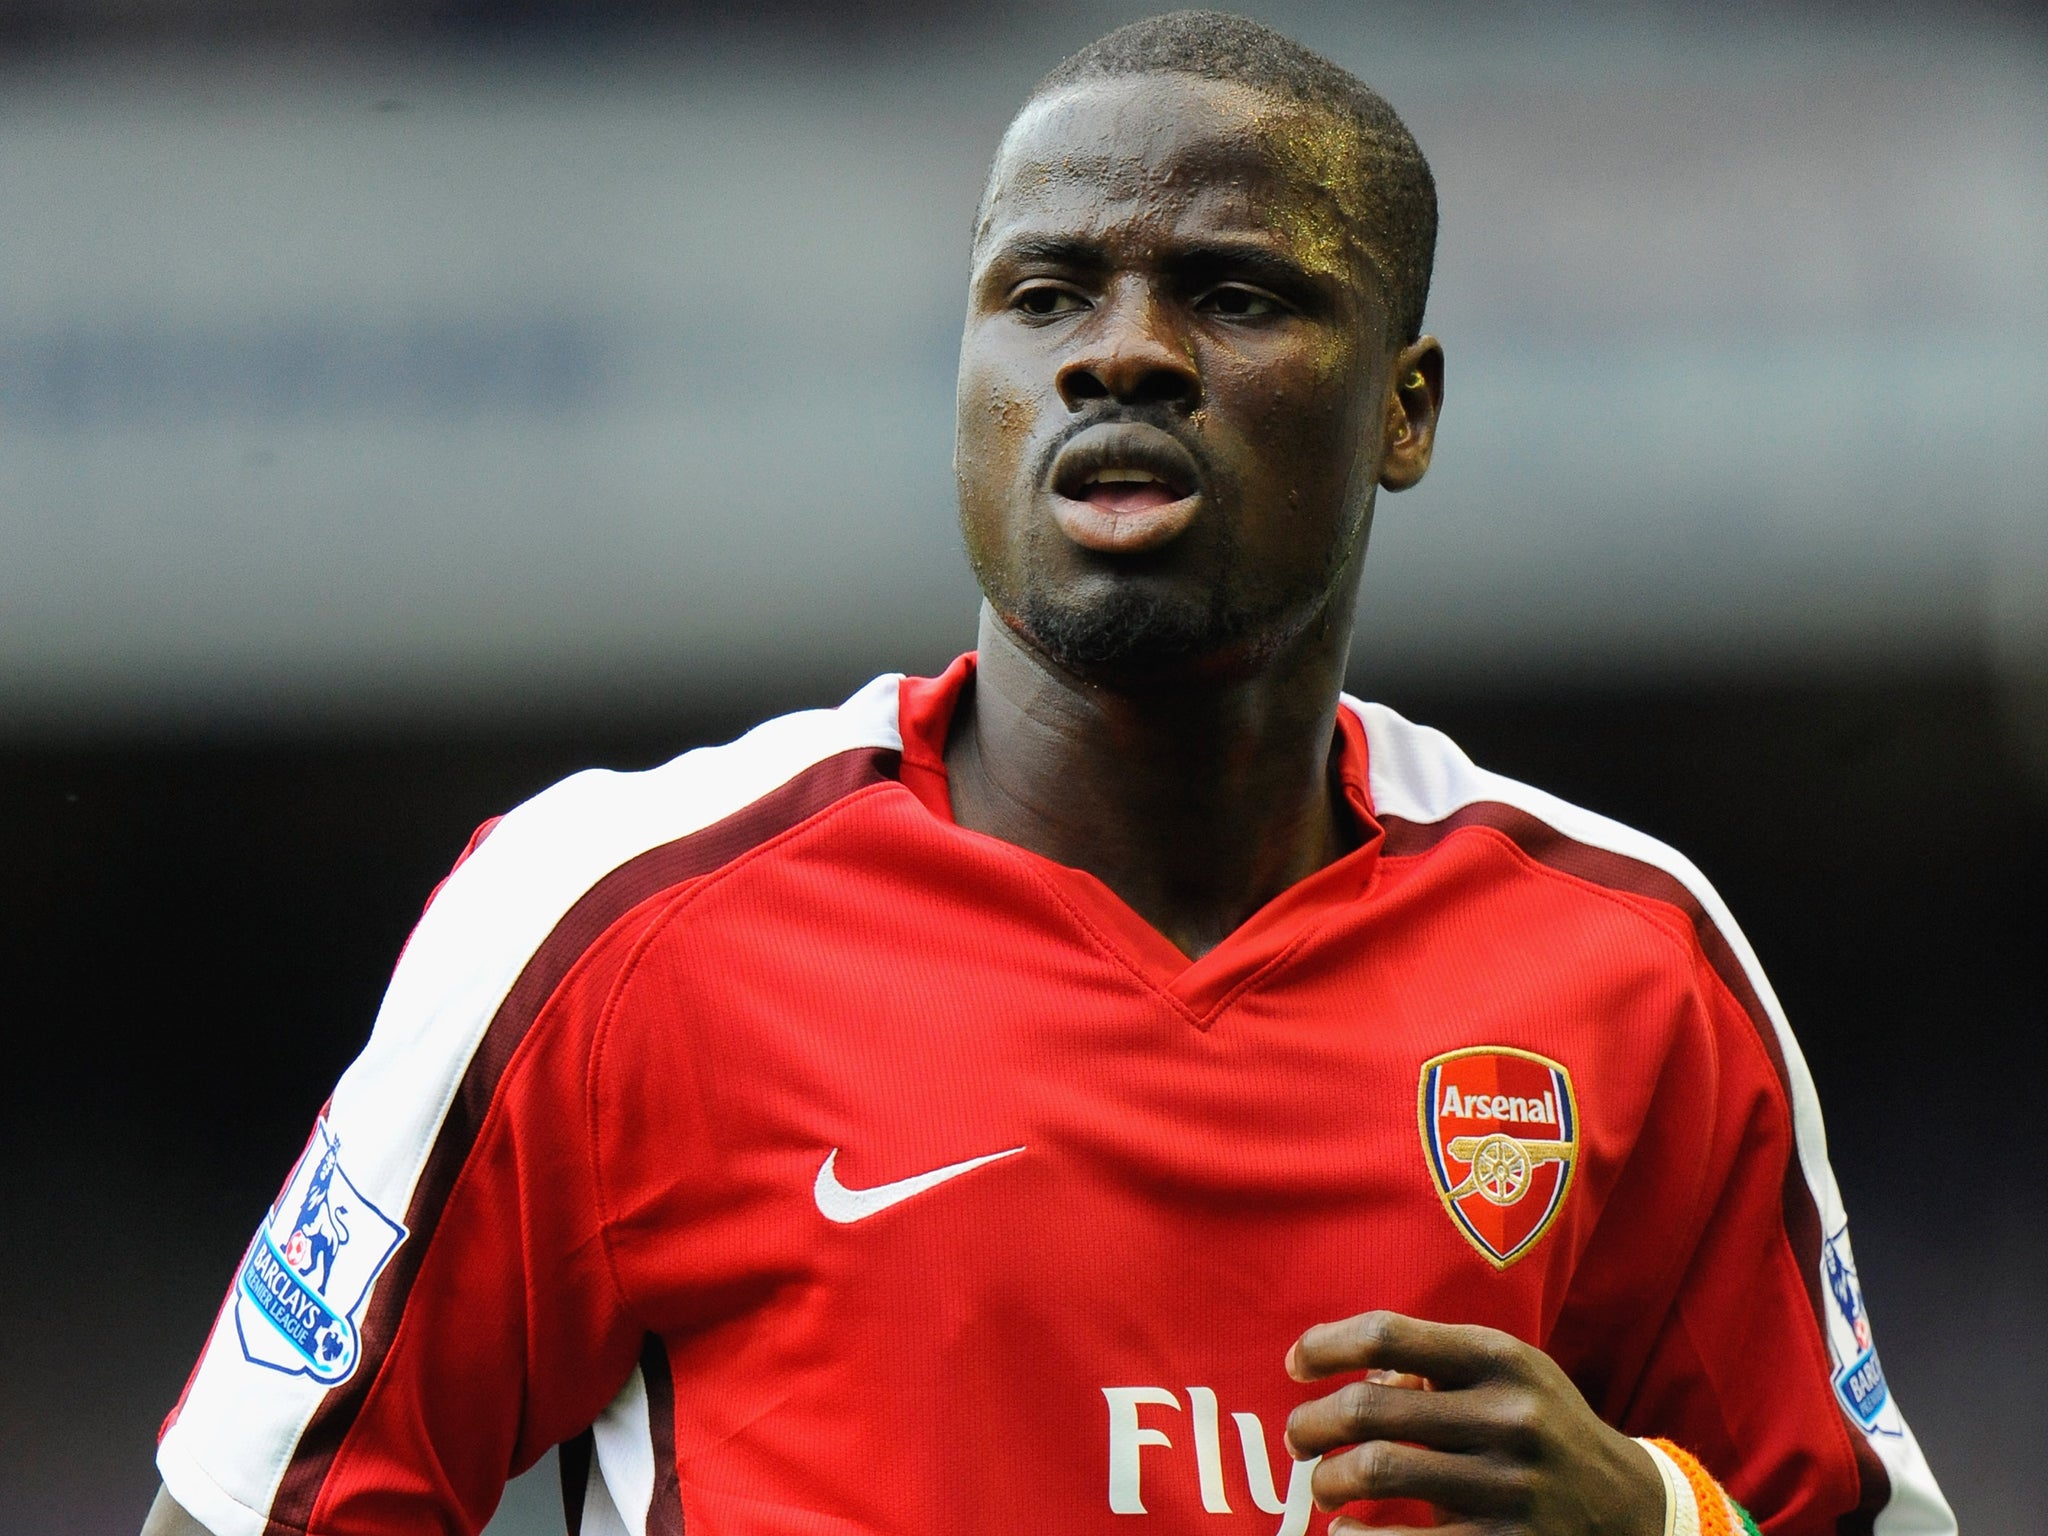 Emmanuel Eboue &apos;dodging bailiffs and sleeping on the floor&apos; as former Arsenal stars admits he&apos;s contemplated suicide